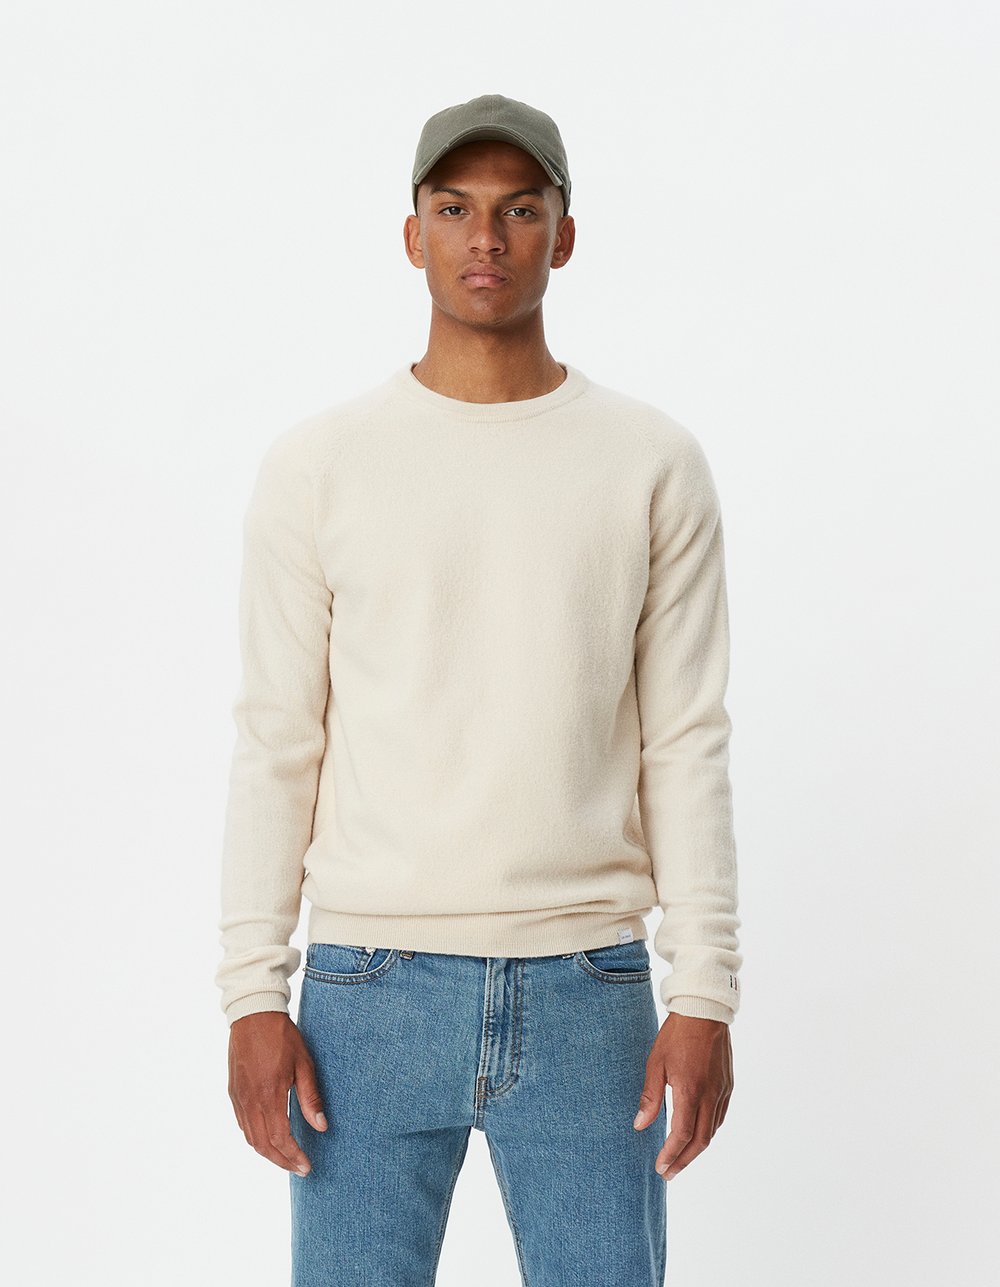 ETHAN WOOL KNIT - IVORY